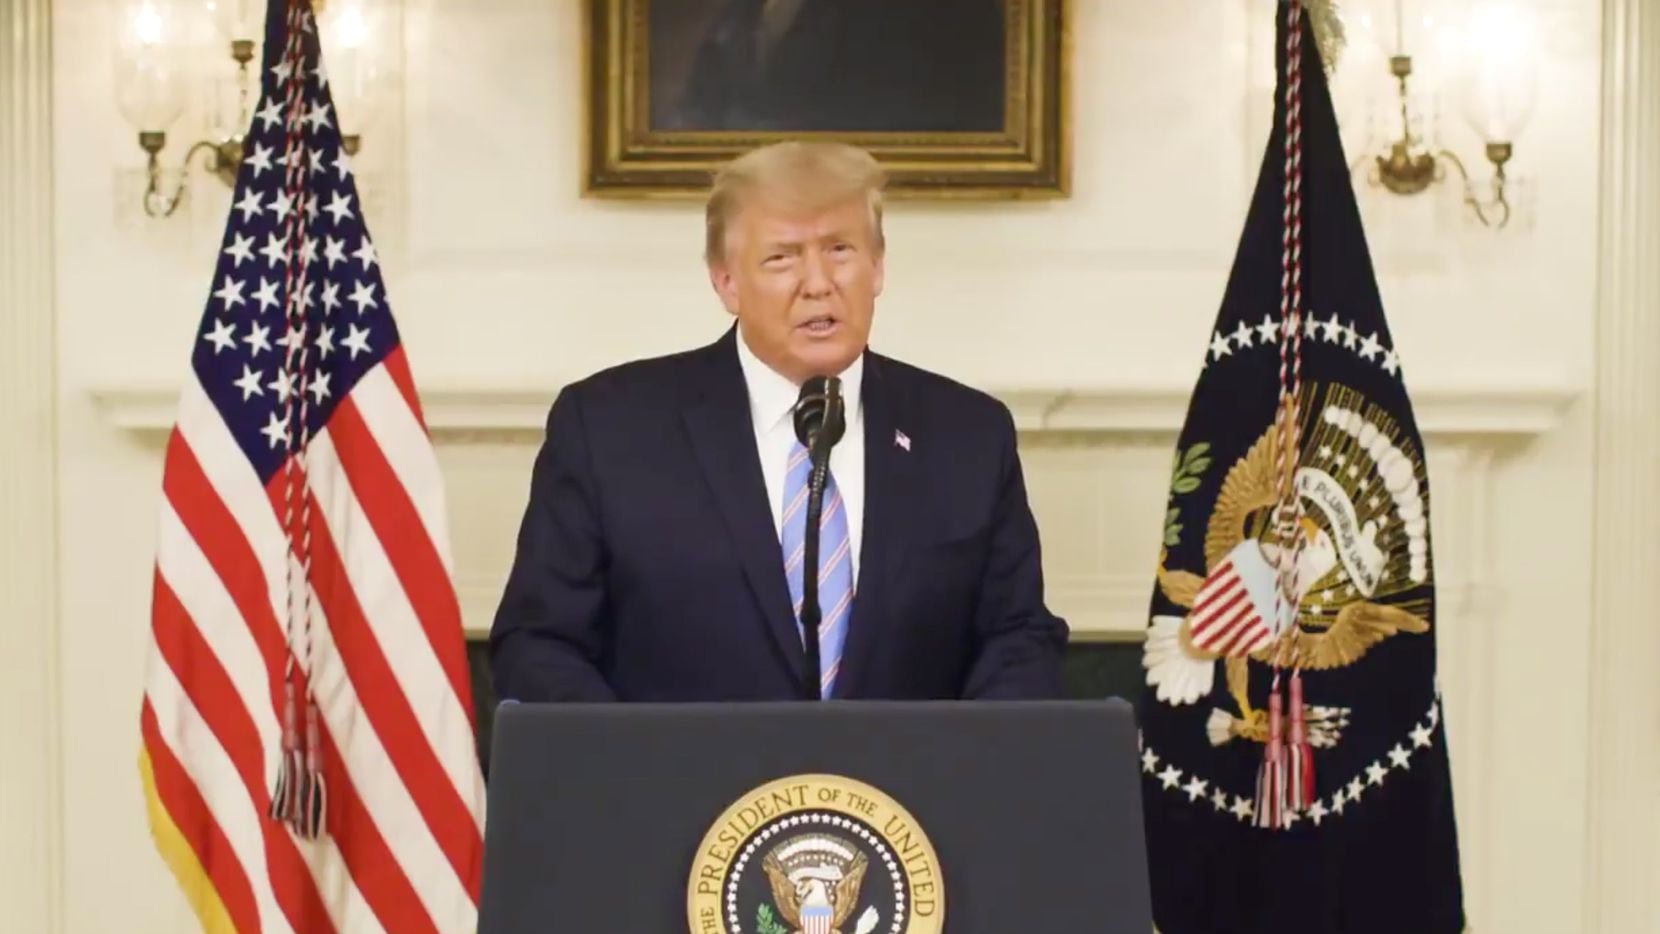 In a video posted to Twitter on Jan. 7, 2021, President Donald Trump condemned the violence...